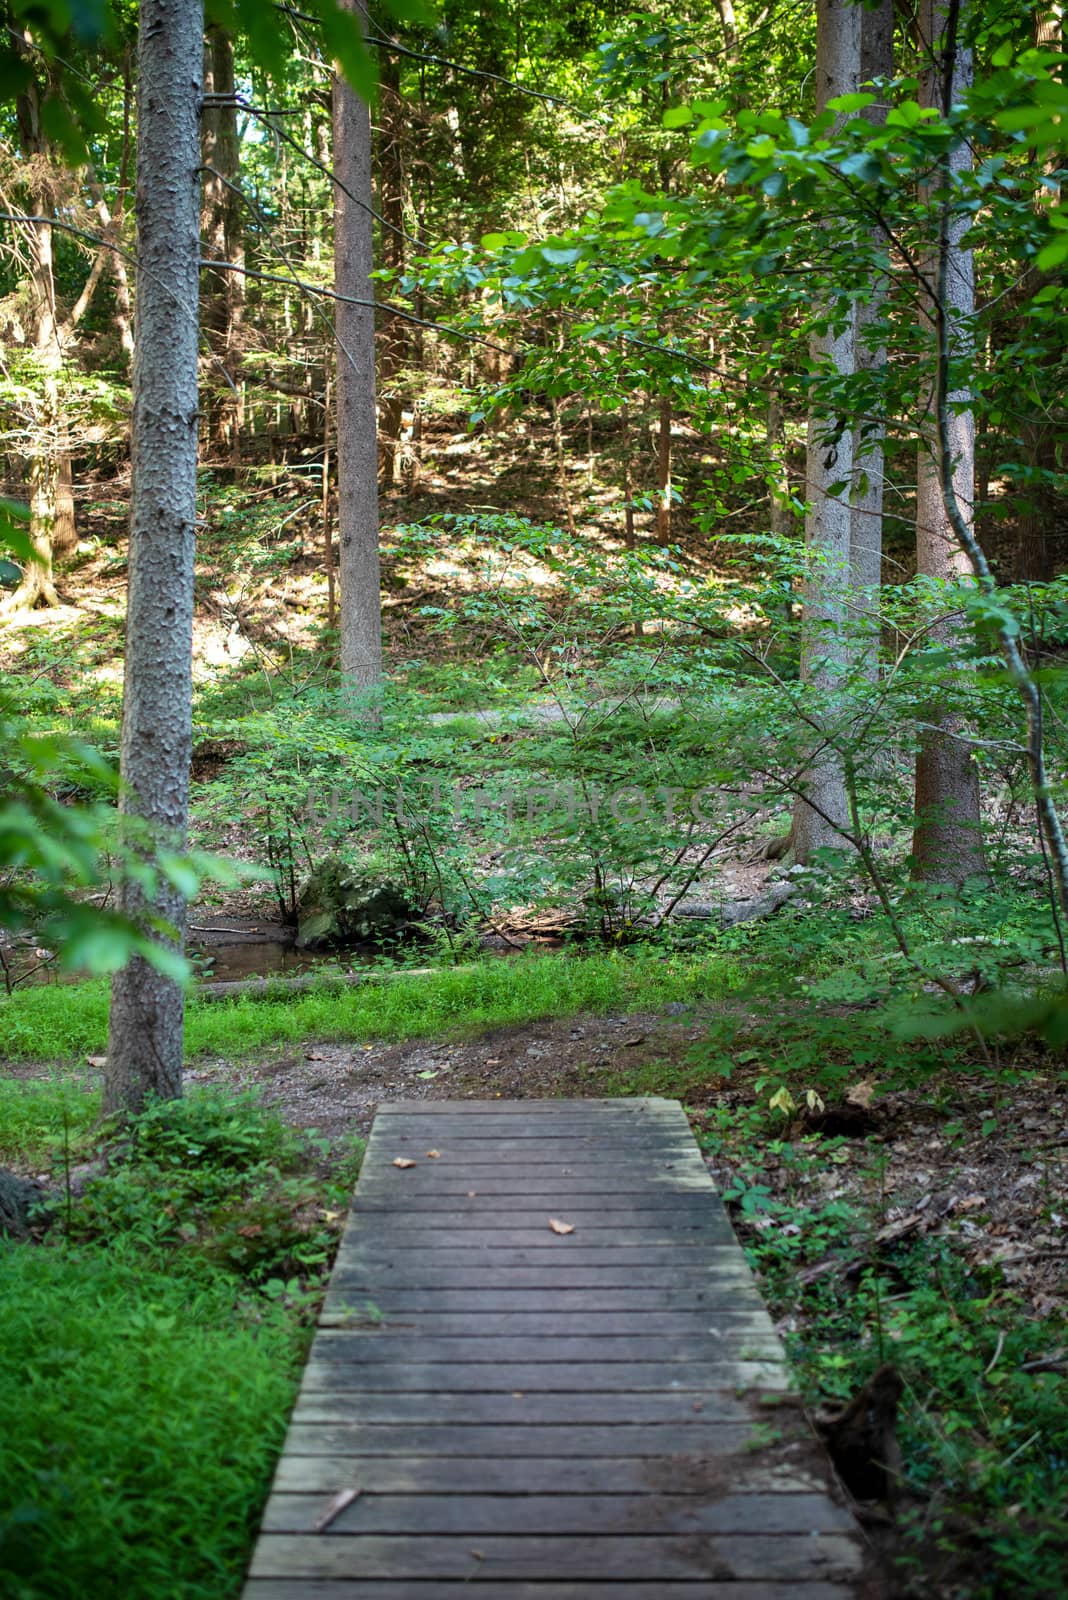 Full fram image in natural light shows the end of a wooden forest walkway, surrounded by green foliage and a calming forest scene. with copy space.